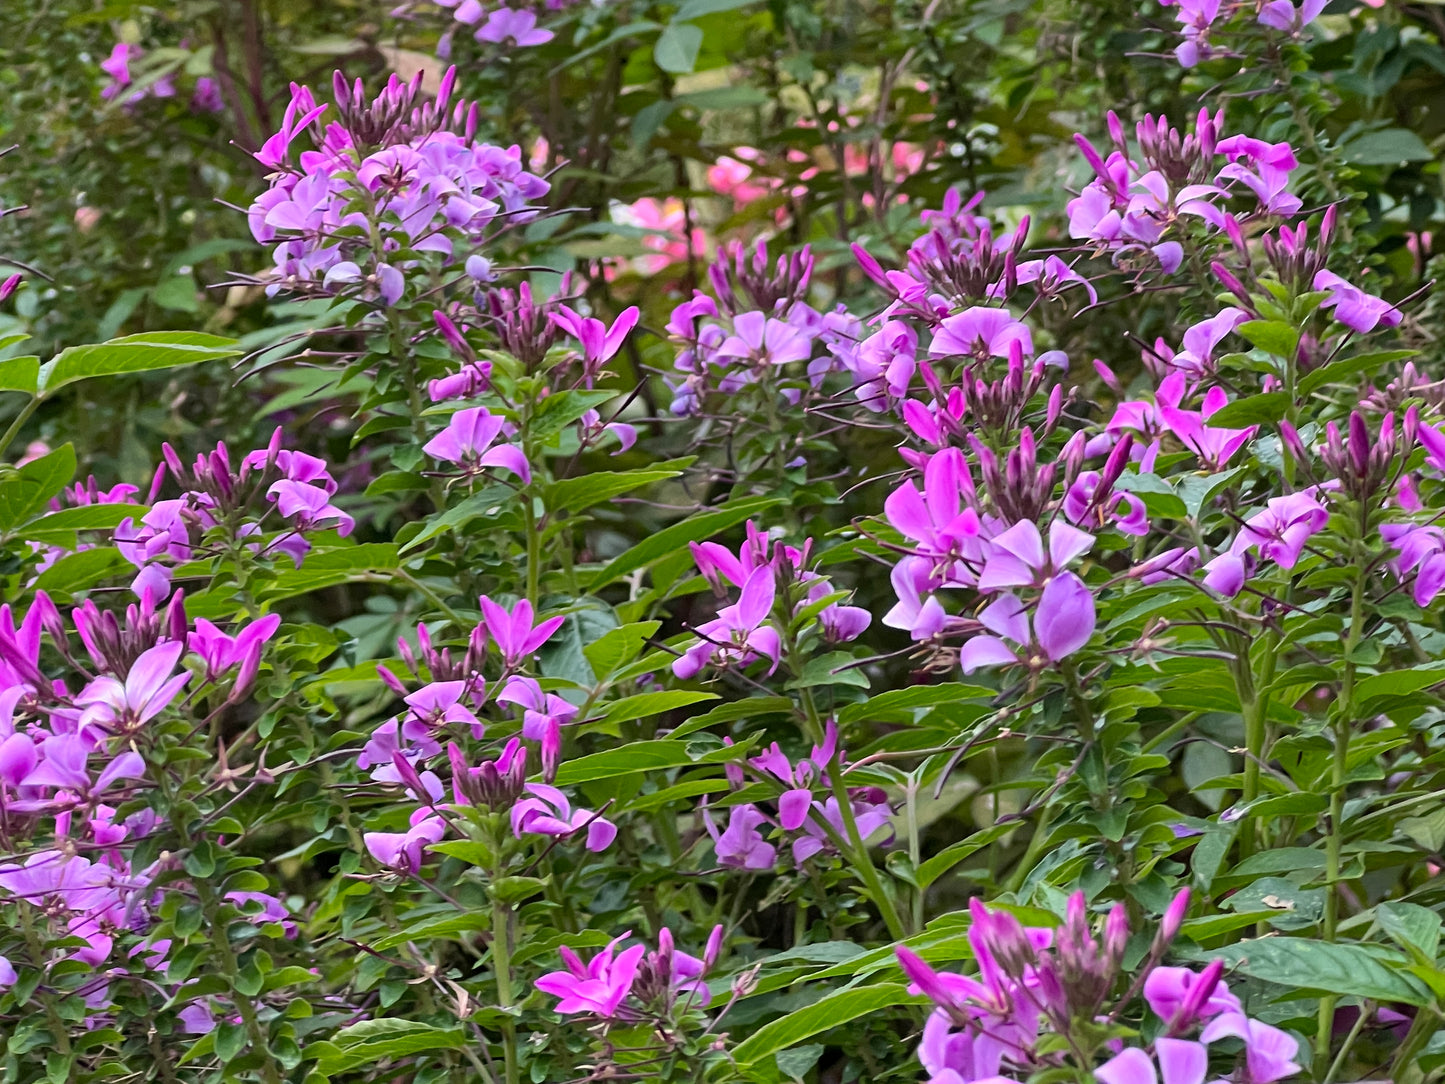 Spider Flower Violet Queen Cleome hassleriana 200 Seeds  USA Company